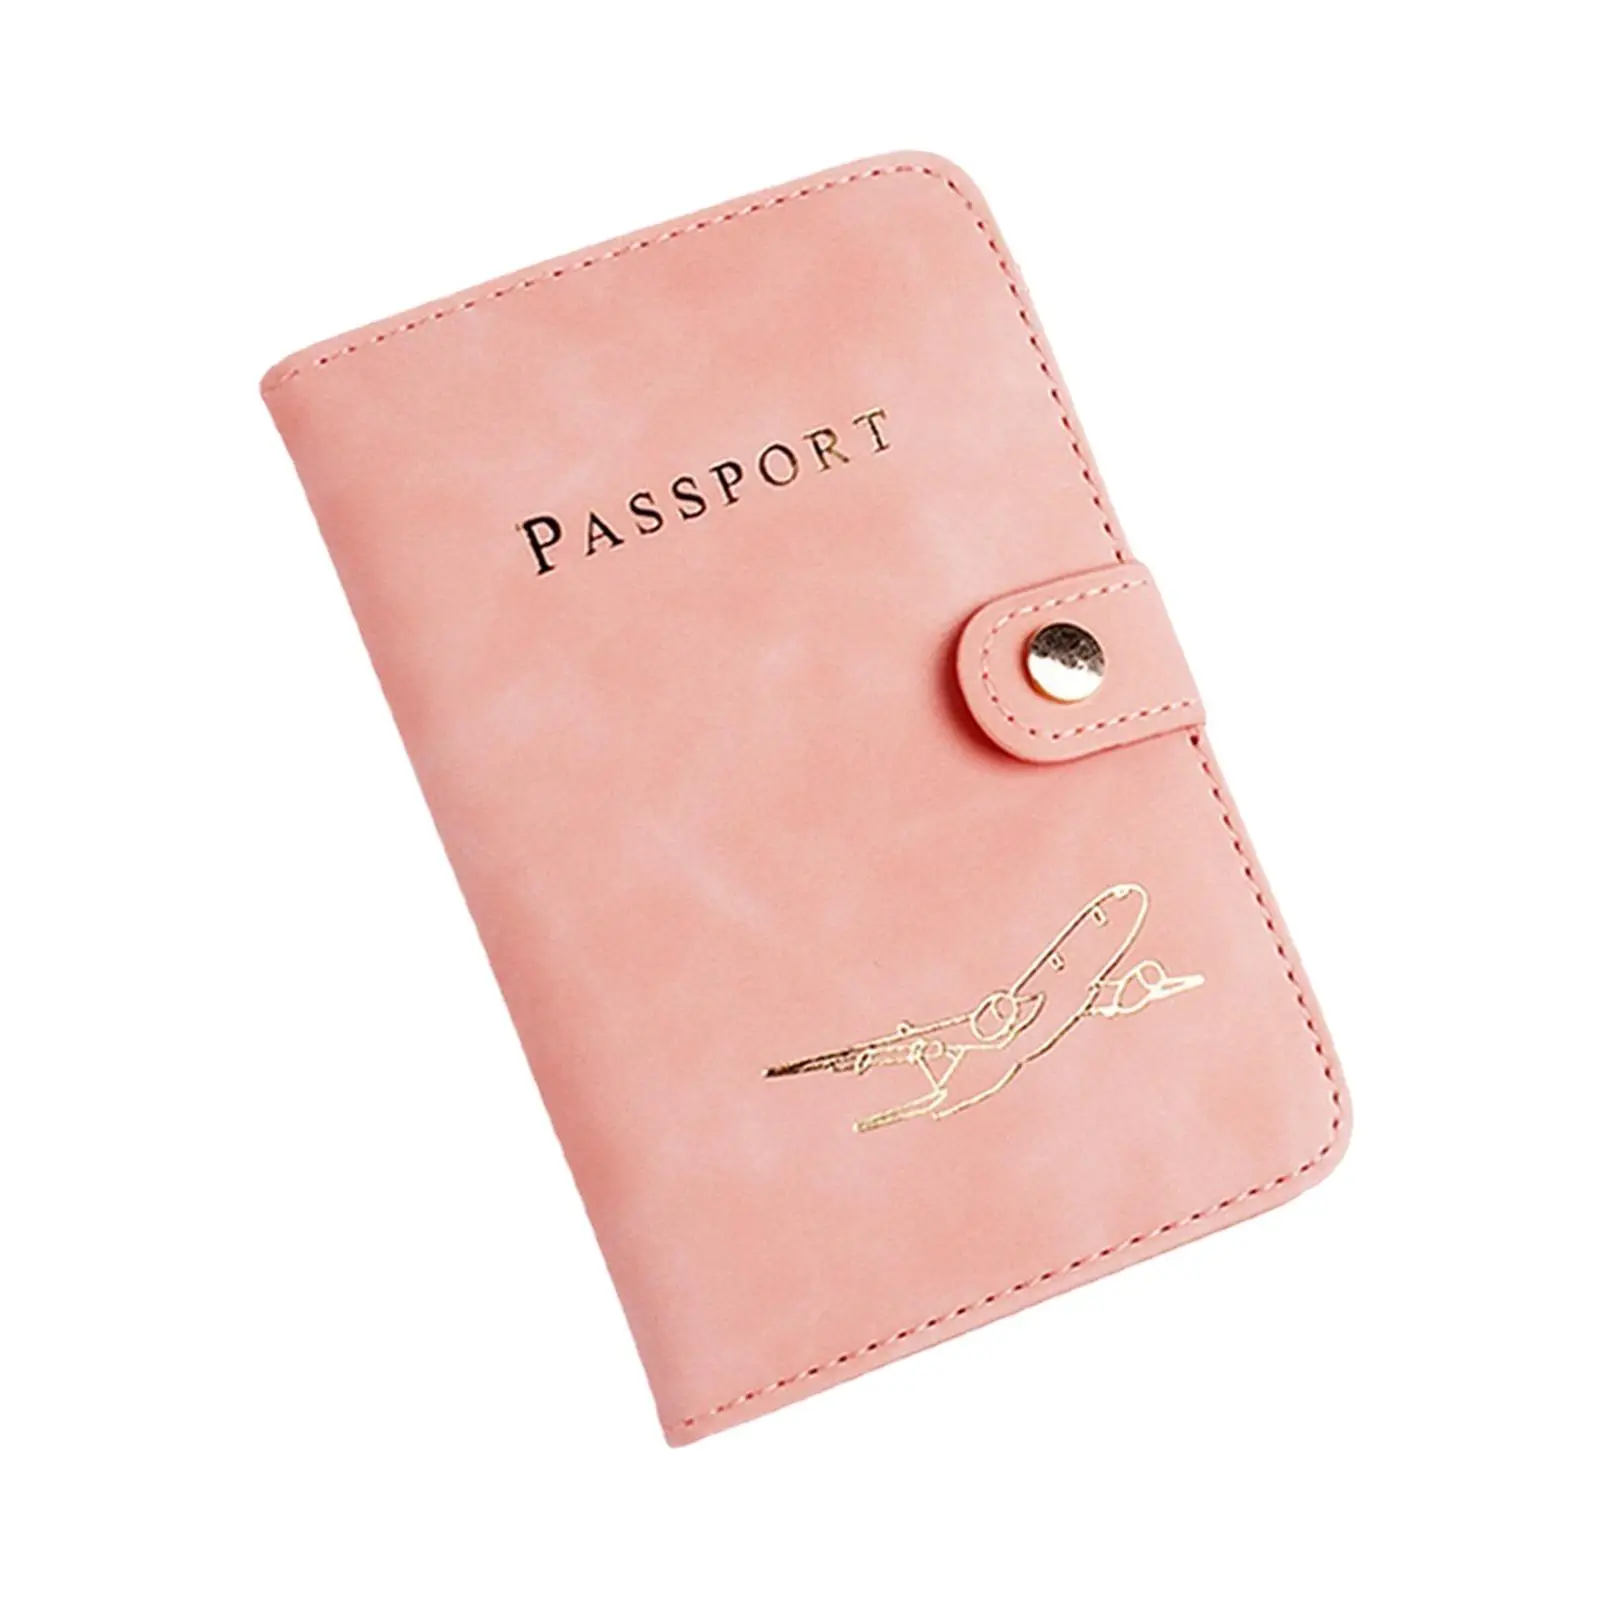 Passport Cover Holder Cards Pouch Durable Fashion Passport Case for Couples